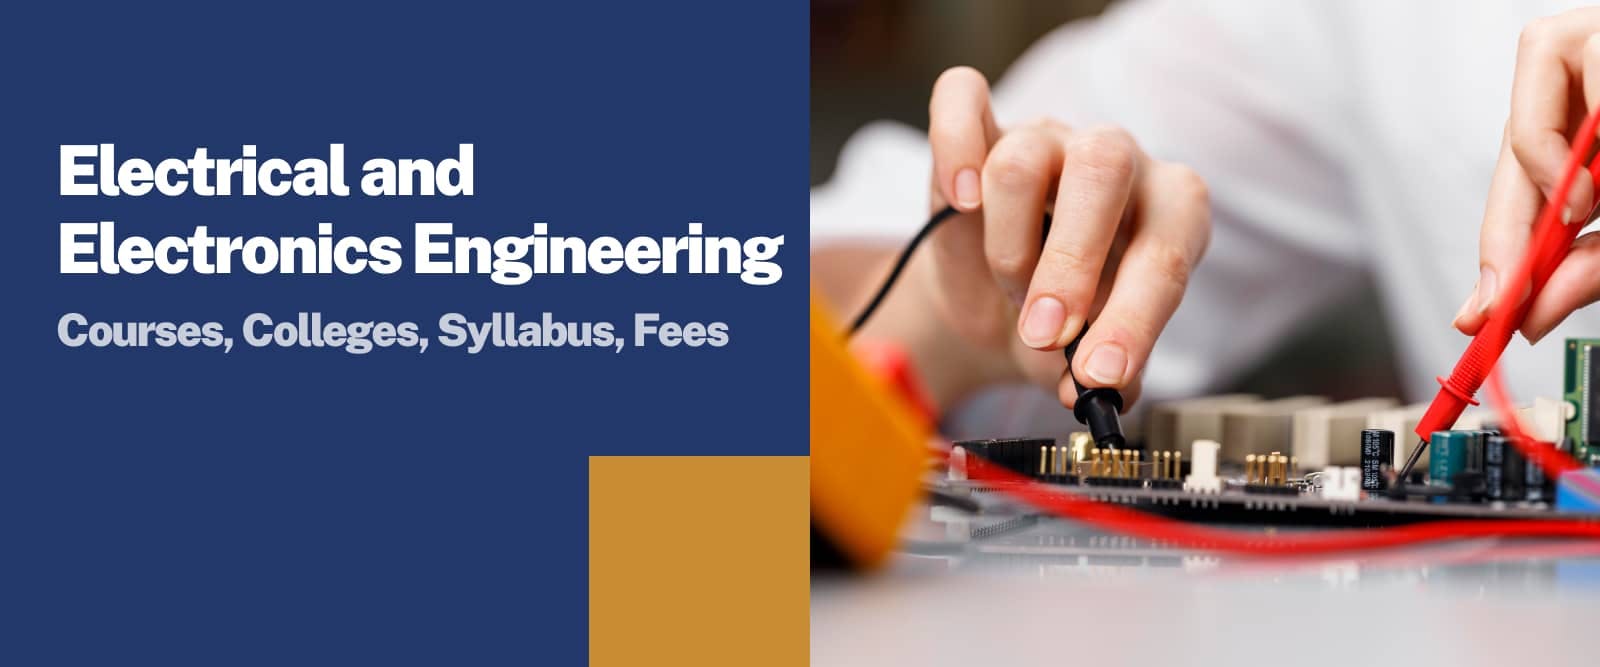 Electrical and Electronics Engineering Courses & Syllabus